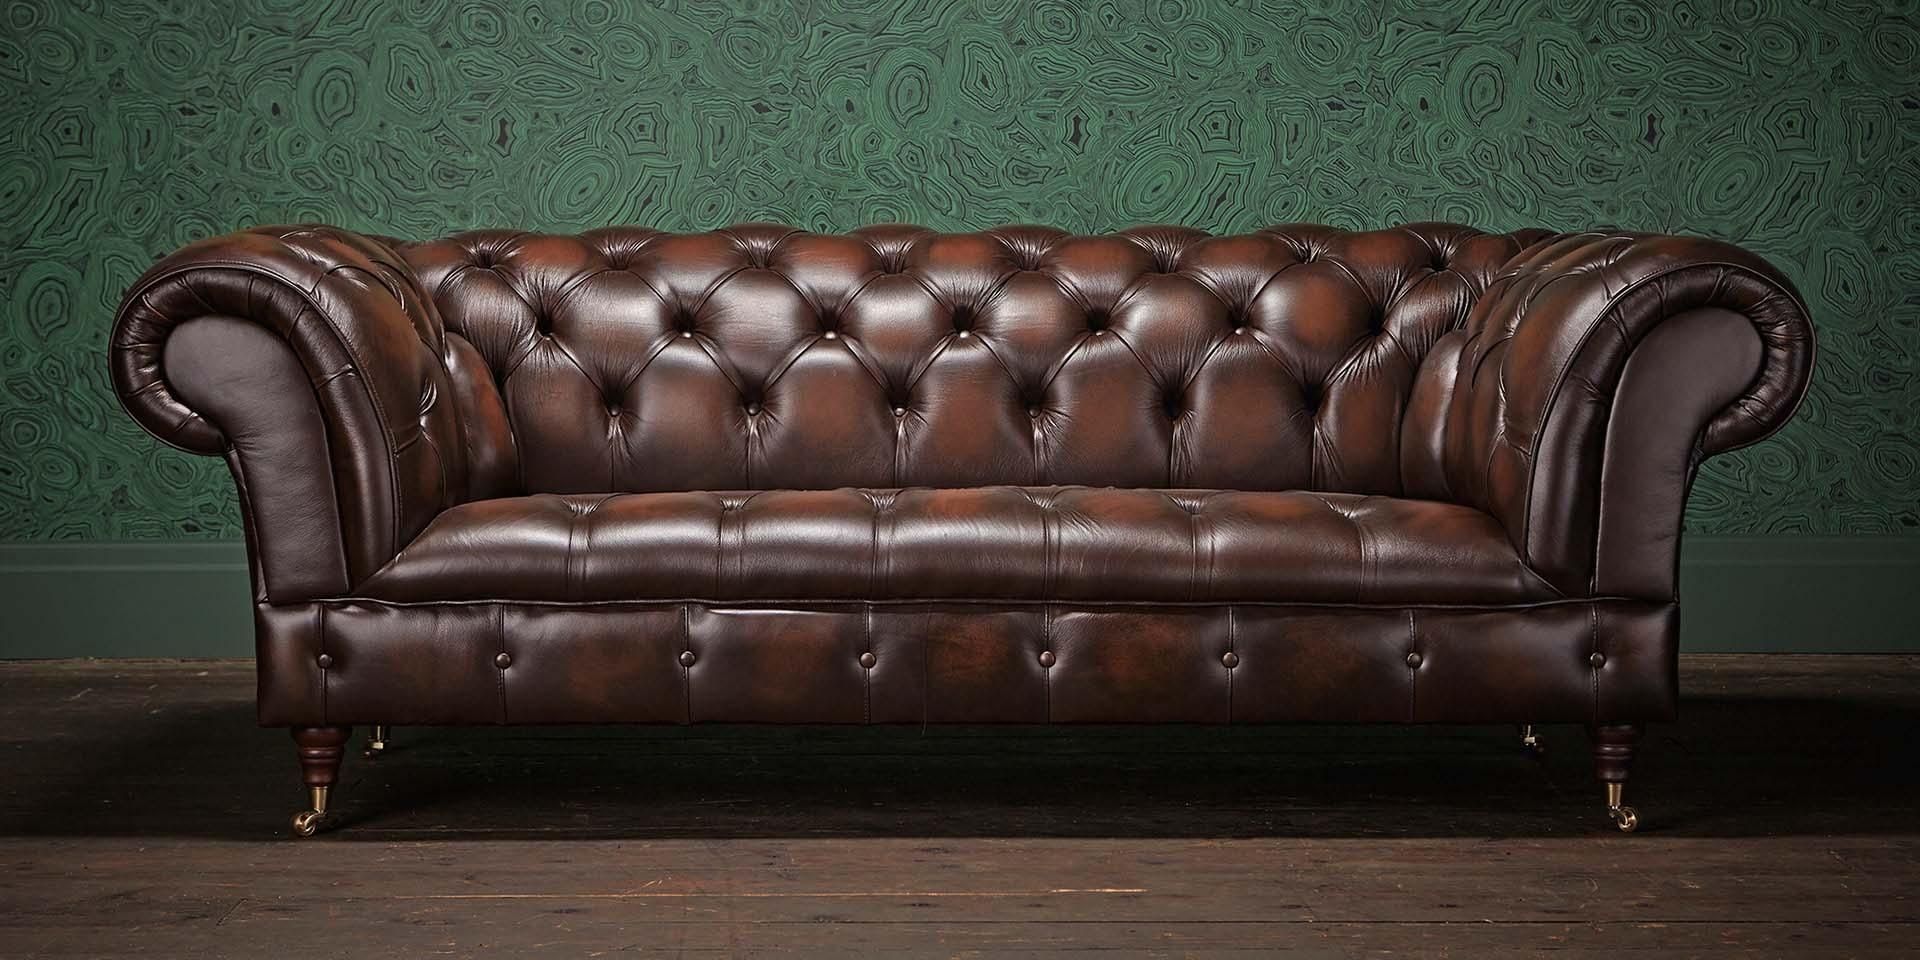 Chesterfields Of England | The Original Chesterfield Company Intended For Chesterfield Sofas (View 1 of 20)